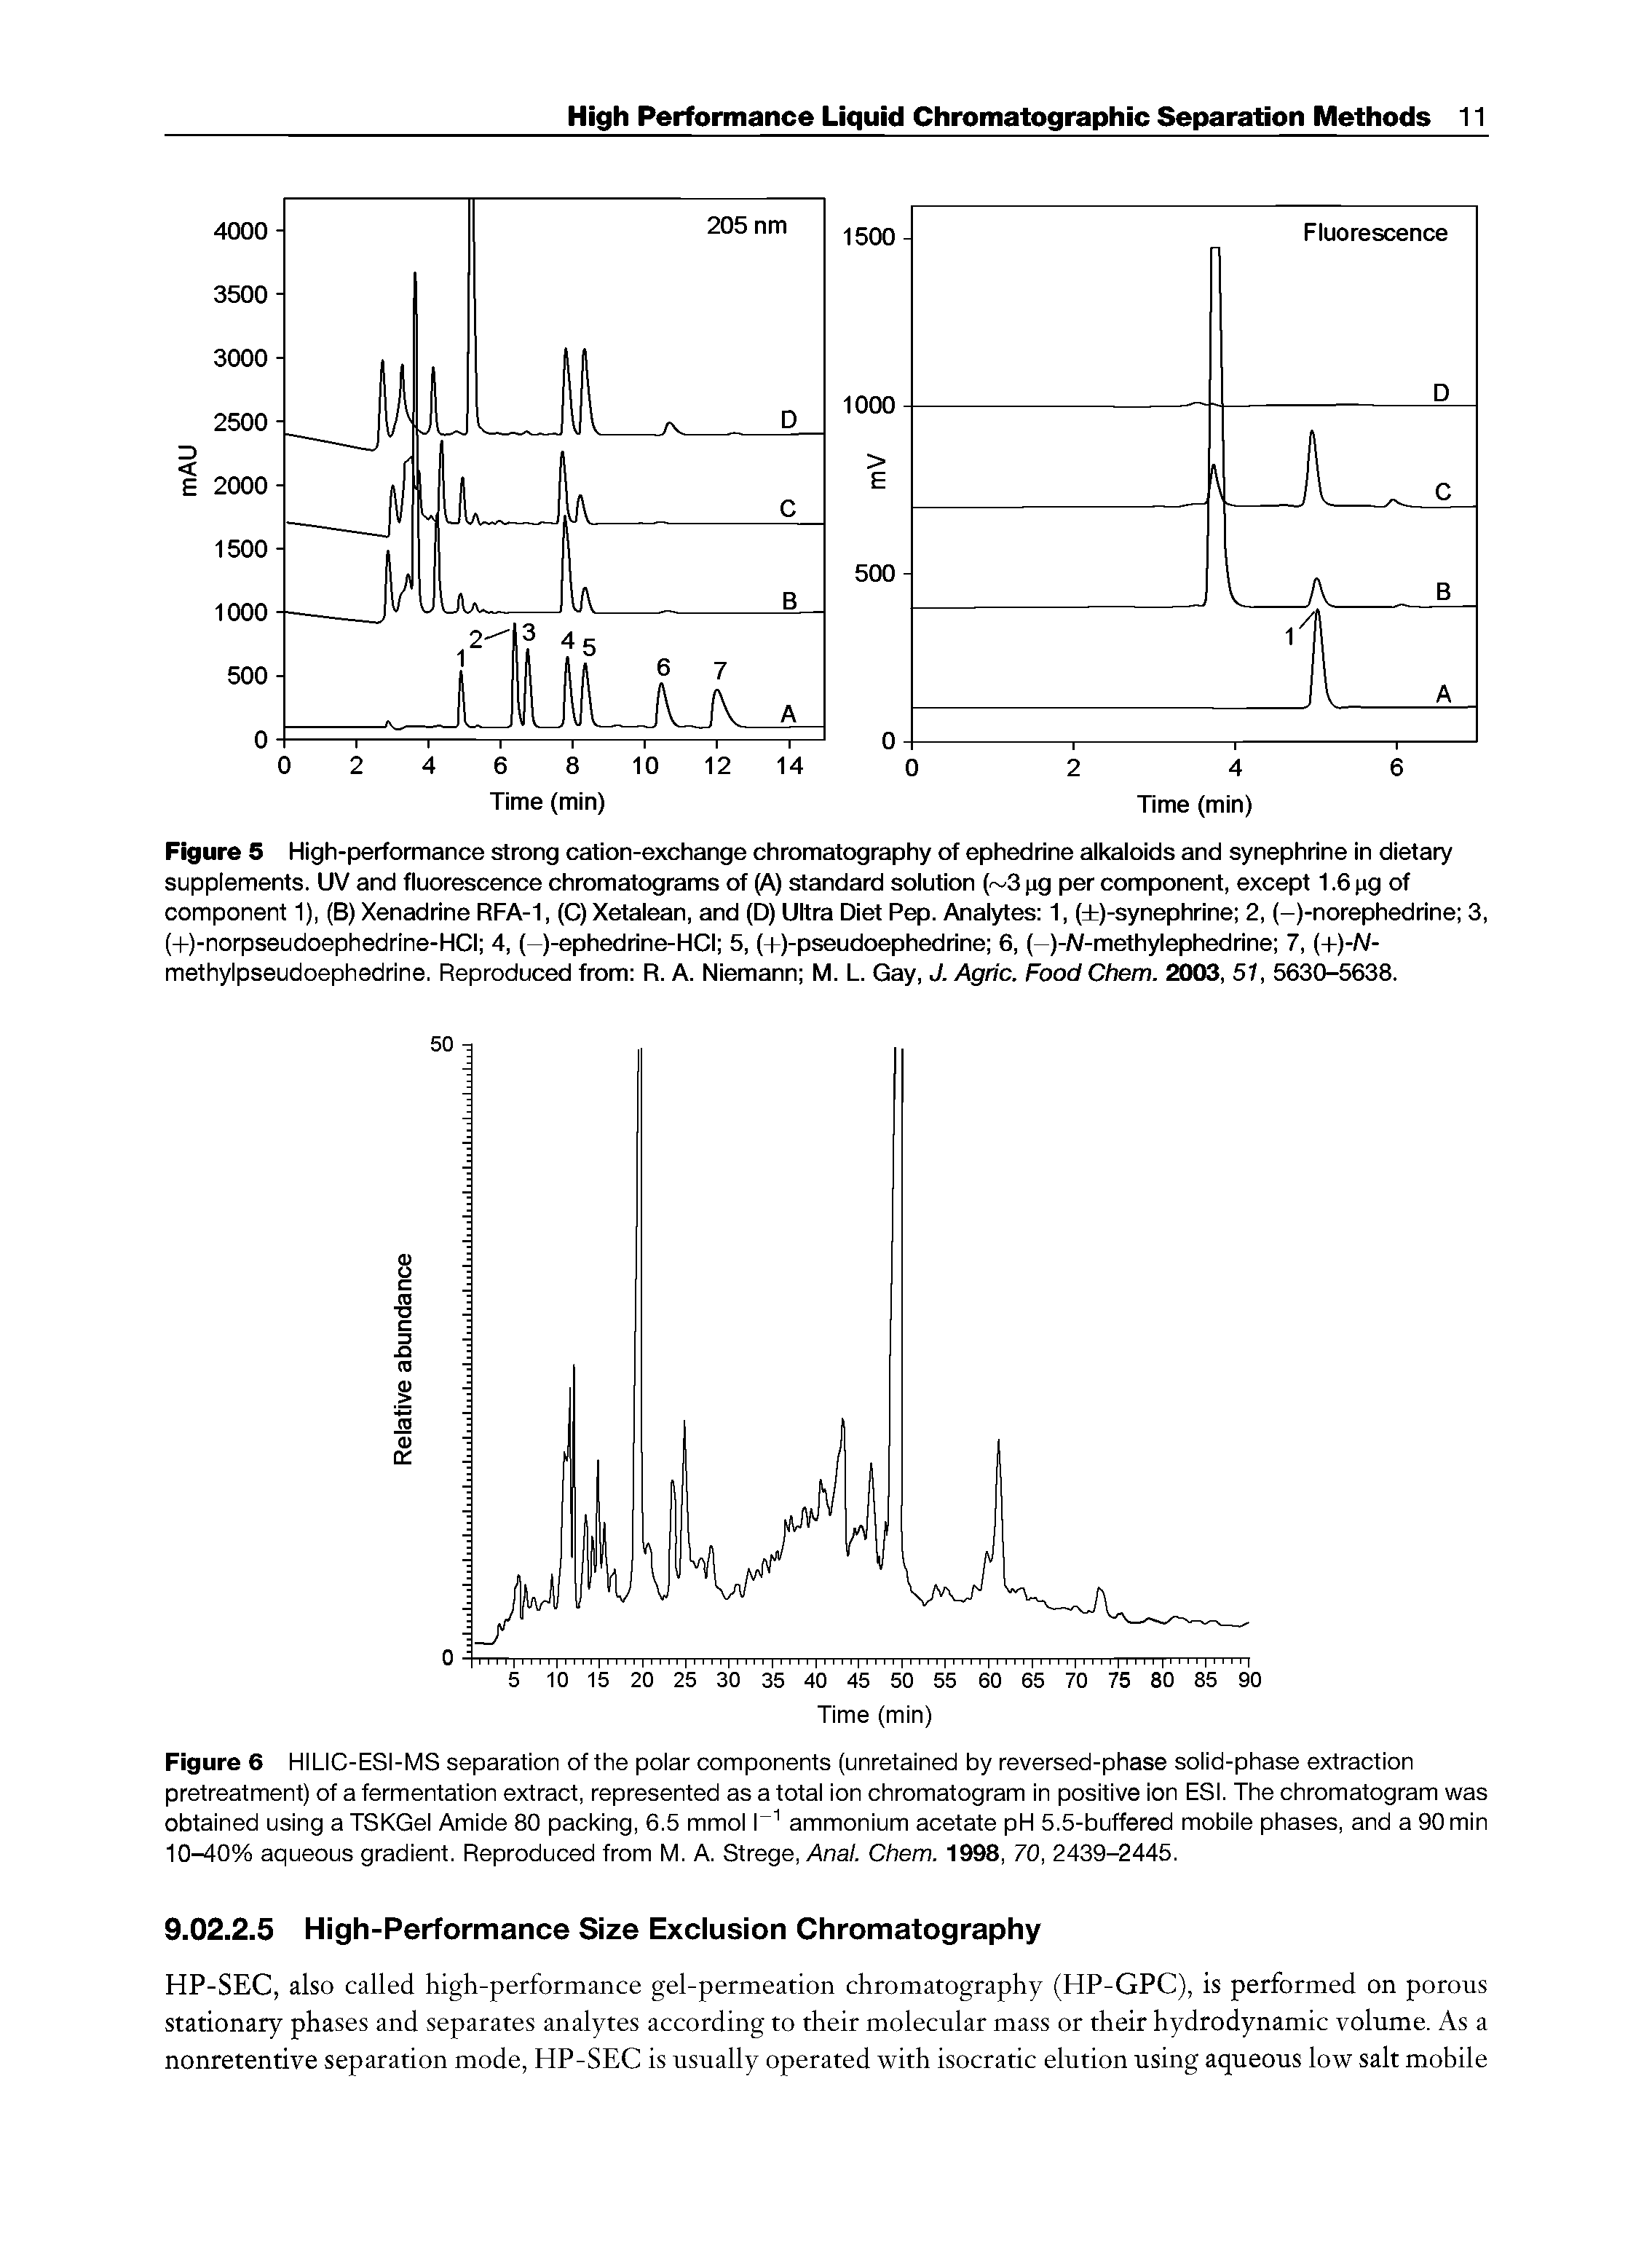 Figure 6 HILIC-ESI-MS separation of the polar components (unretained by reversed-phase solid-phase extraction pretreatment) of a fermentation extract, represented as a total ion chromatogram in positive ion ESI. The chromatogram was obtained using a TSKGel Amide 80 packing, 6.5 mmol r1 ammonium acetate pH 5.5-buffered mobile phases, and a 90 min 10-40% aqueous gradient. Reproduced from M. A. Strege, Anal. Chem. 1998, 70, 2439-2445.